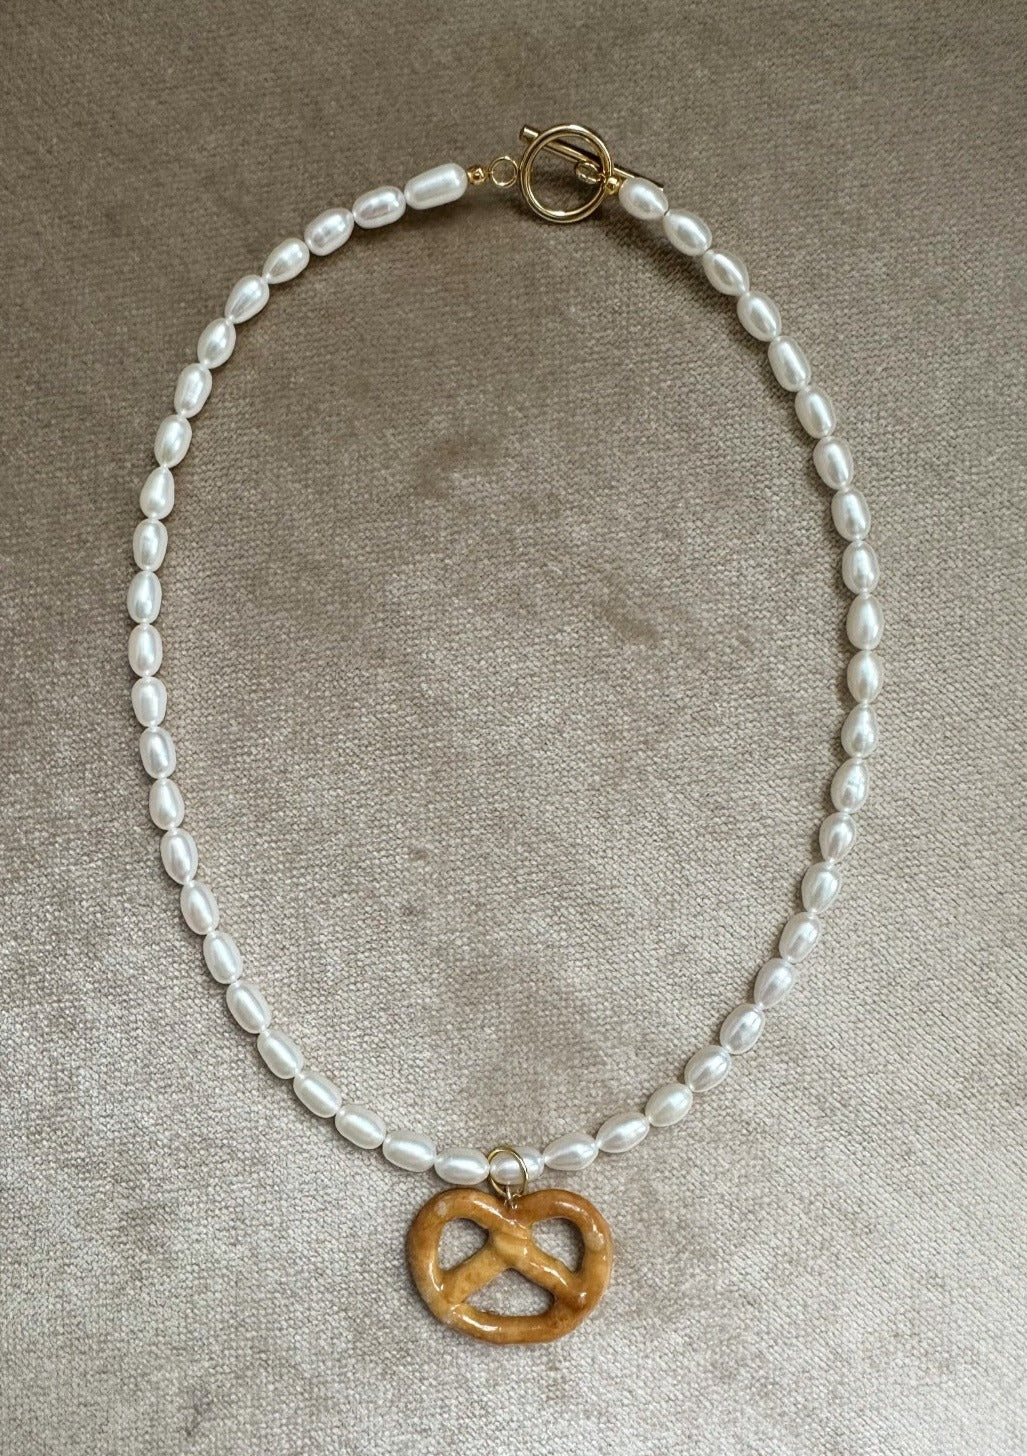 Resin coated pretzel on beaded pearl necklace with gold clasp.